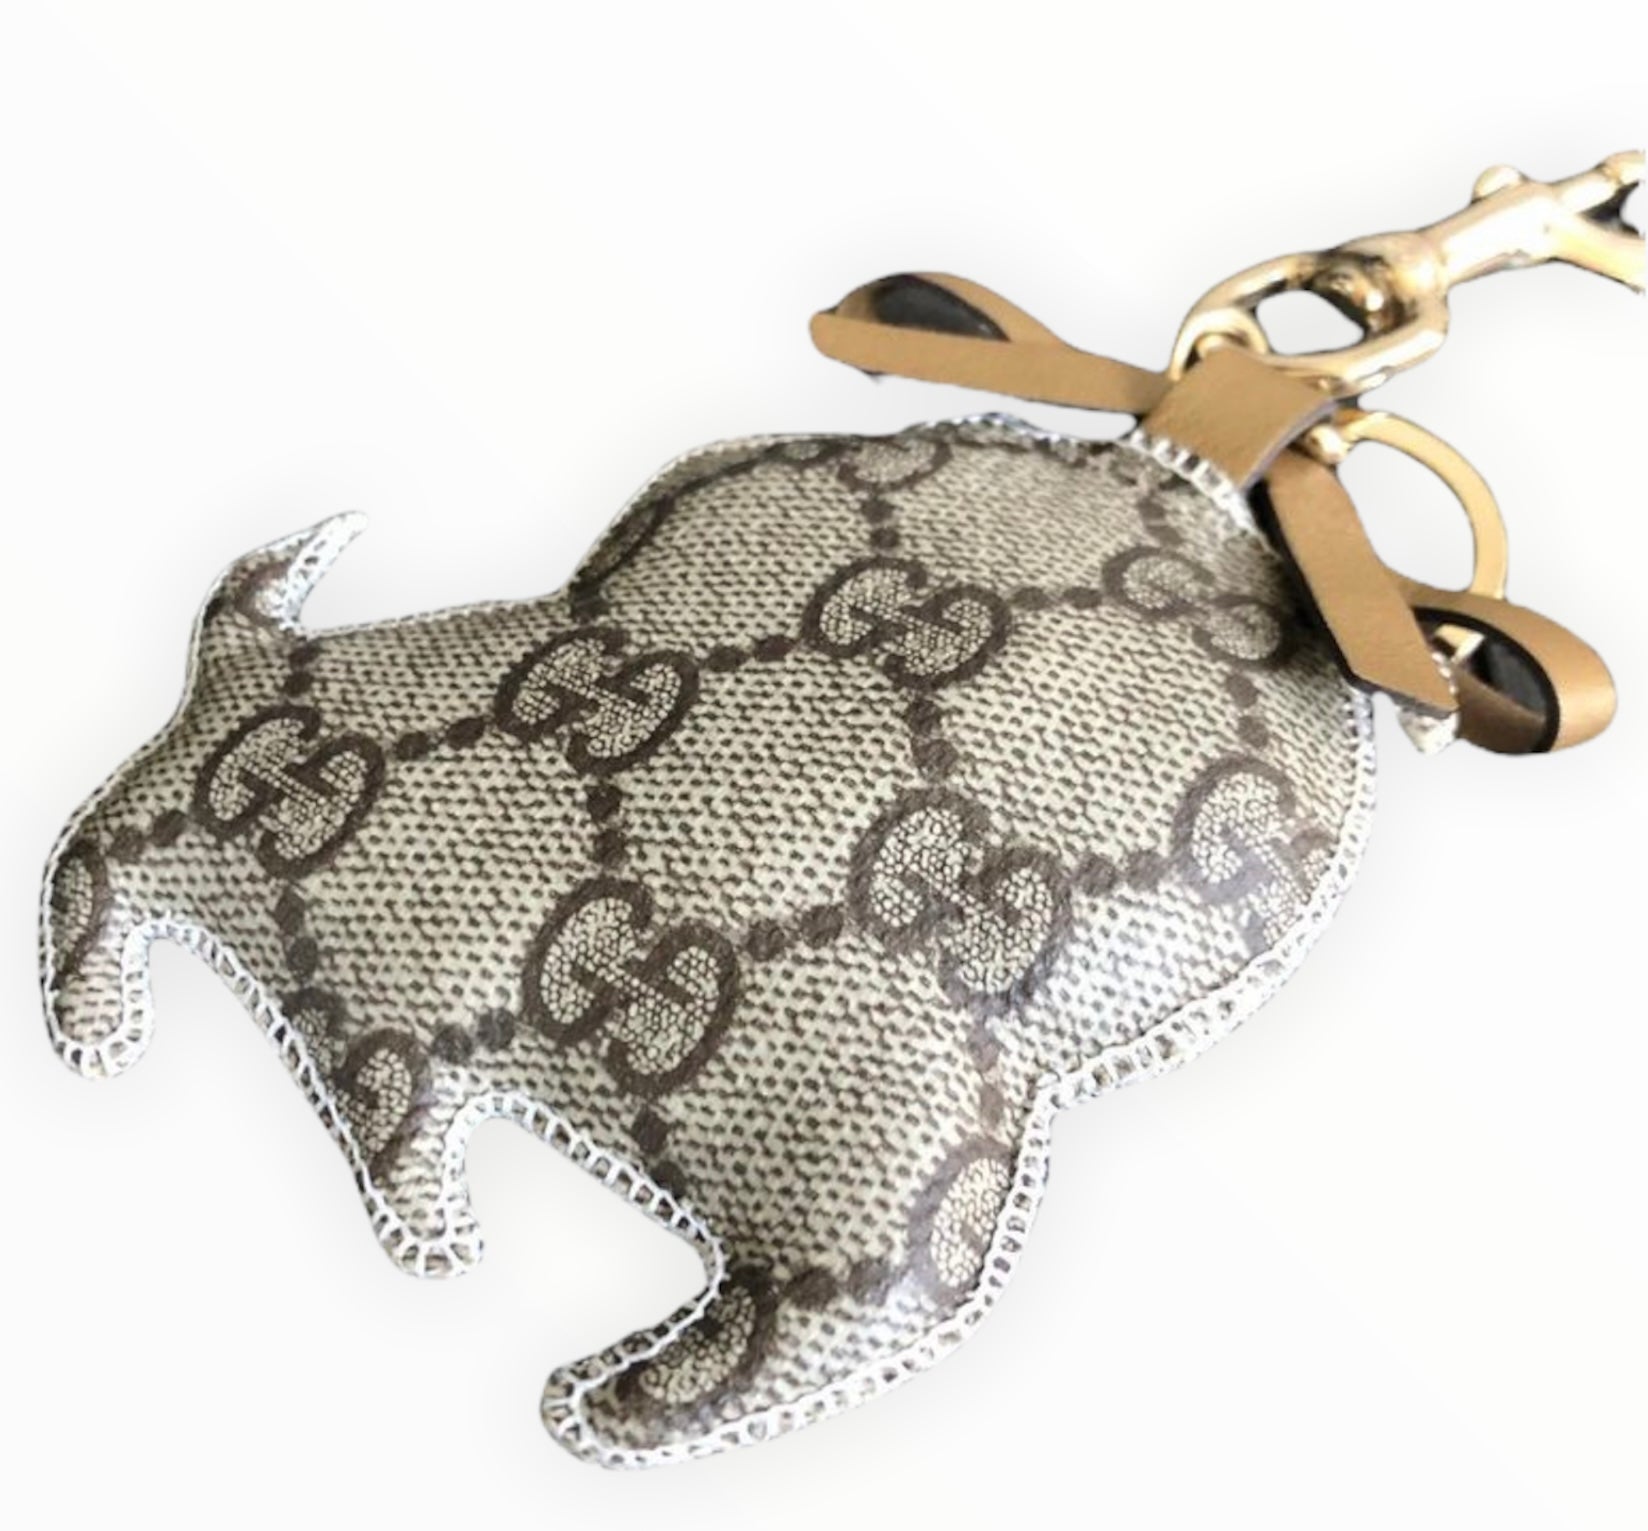 GUCCI Bulldog Bag Charm Key Ring Keychain – Collections Couture